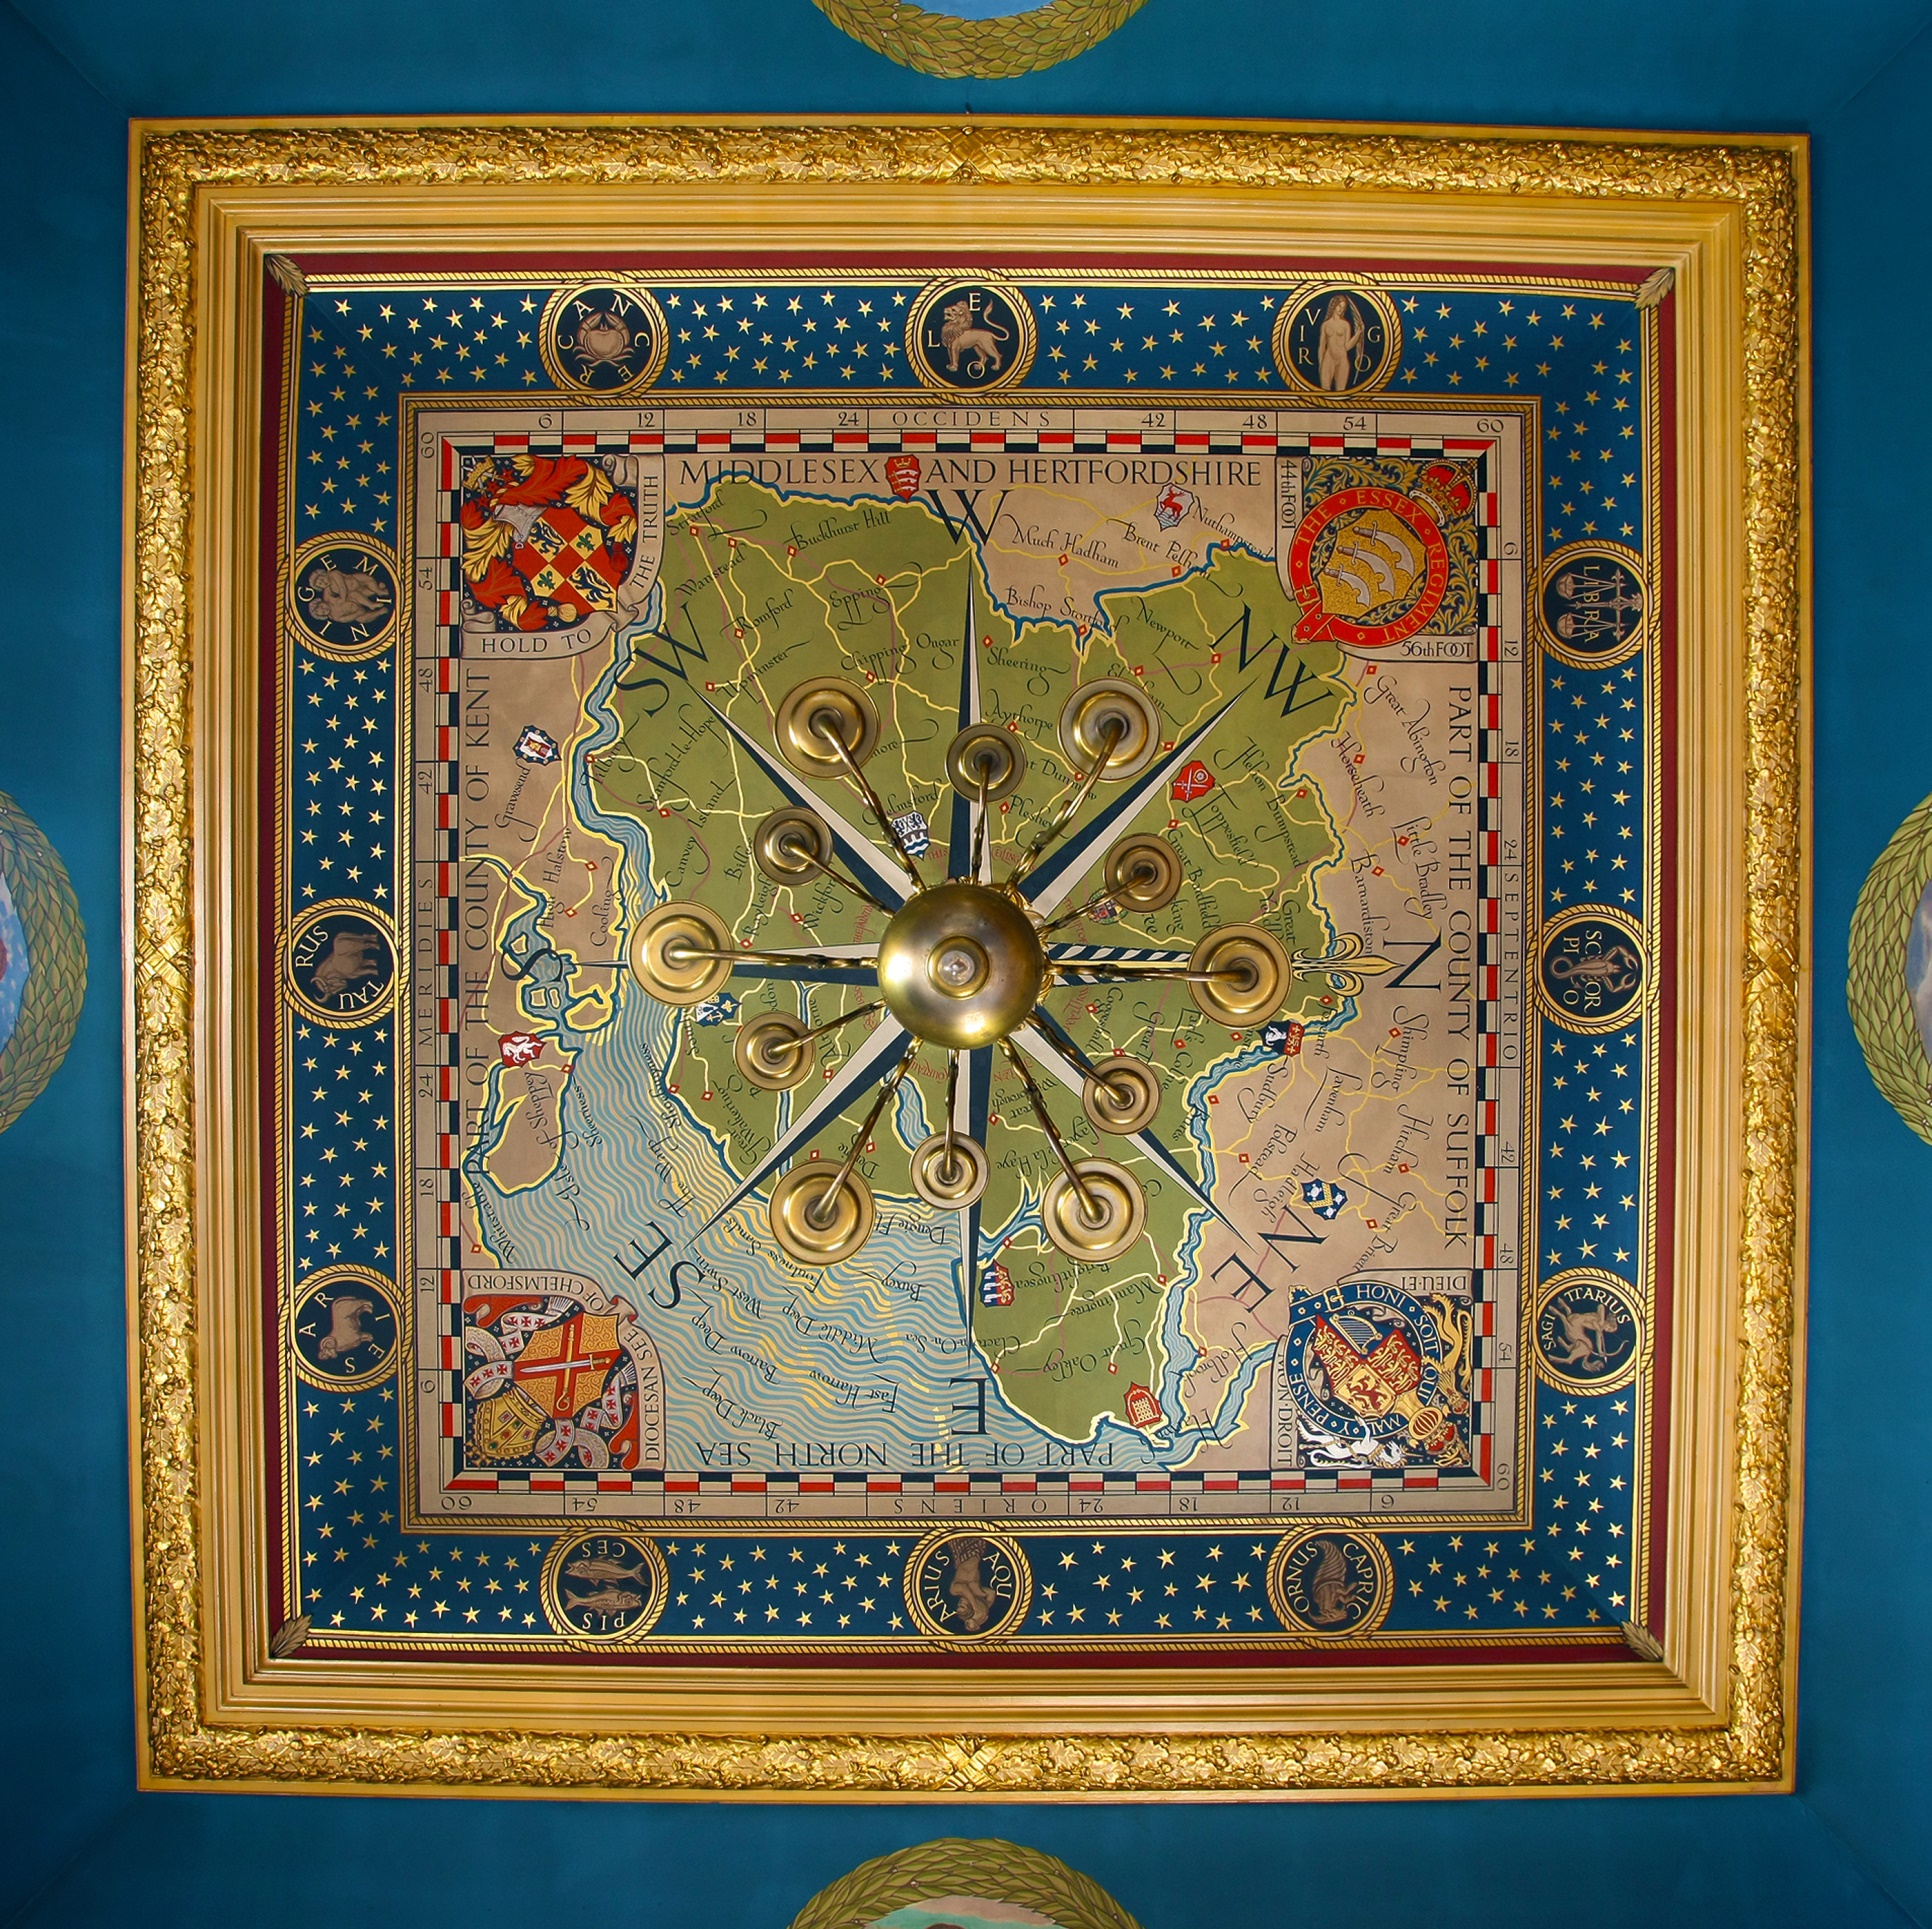 ceiling of the Courtauld room at the town hall